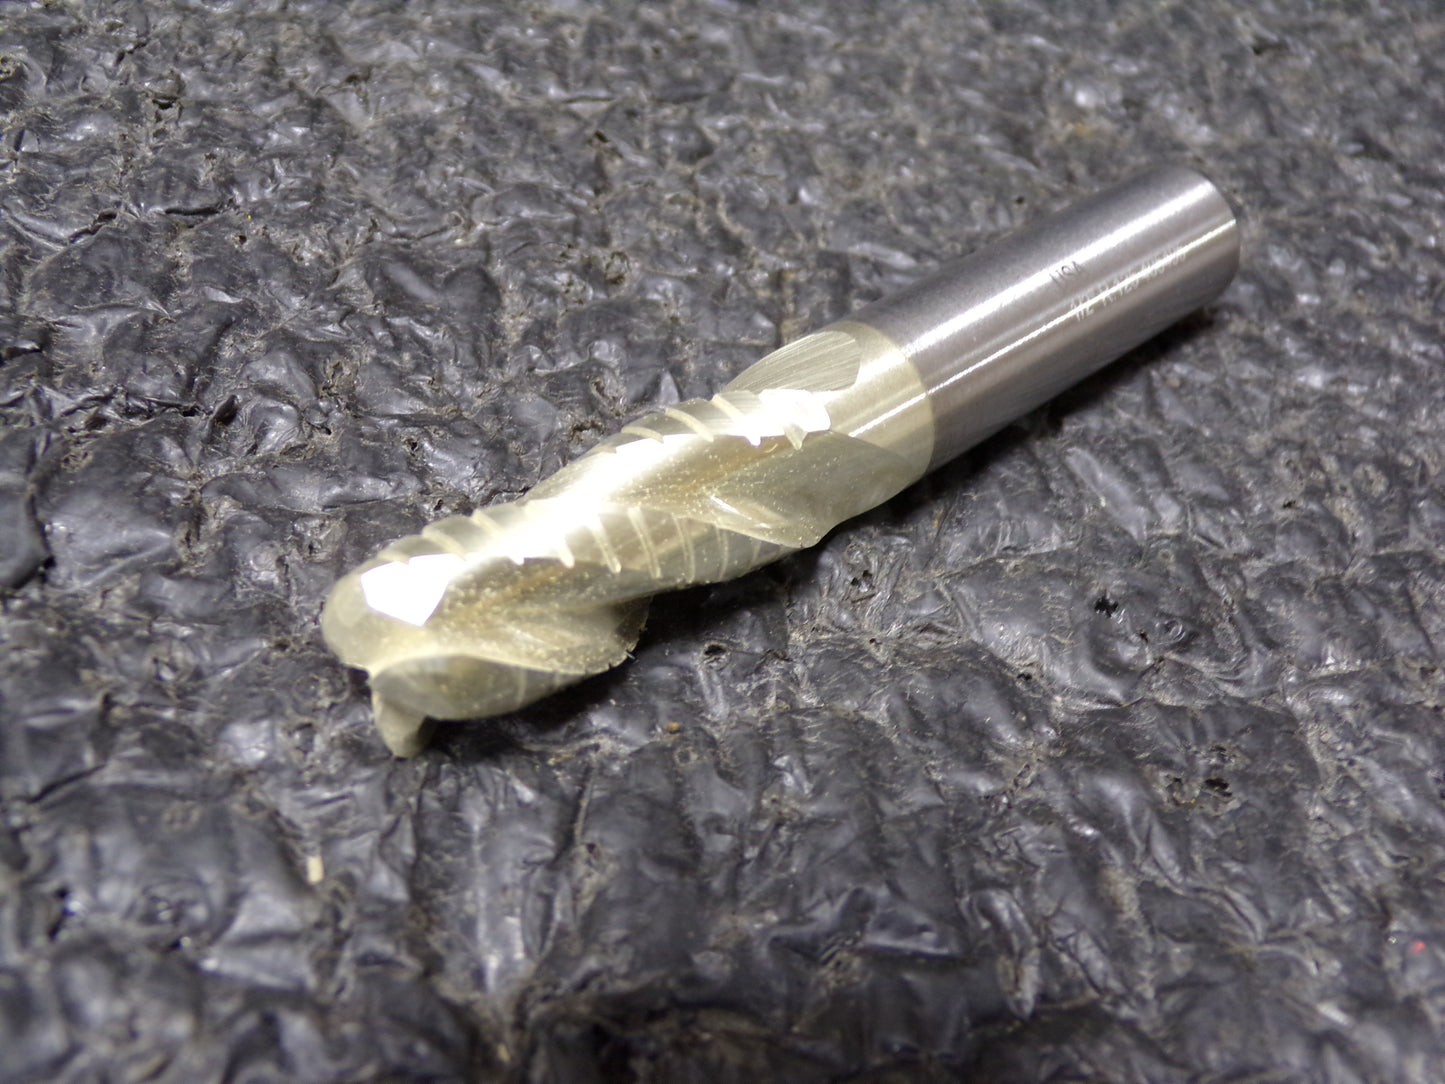 MELIN TOOL COMPANY Rougher/Finisher End Mill R.125 1/2", Overall Length: 3-1/4" (CR00670-WTA16)